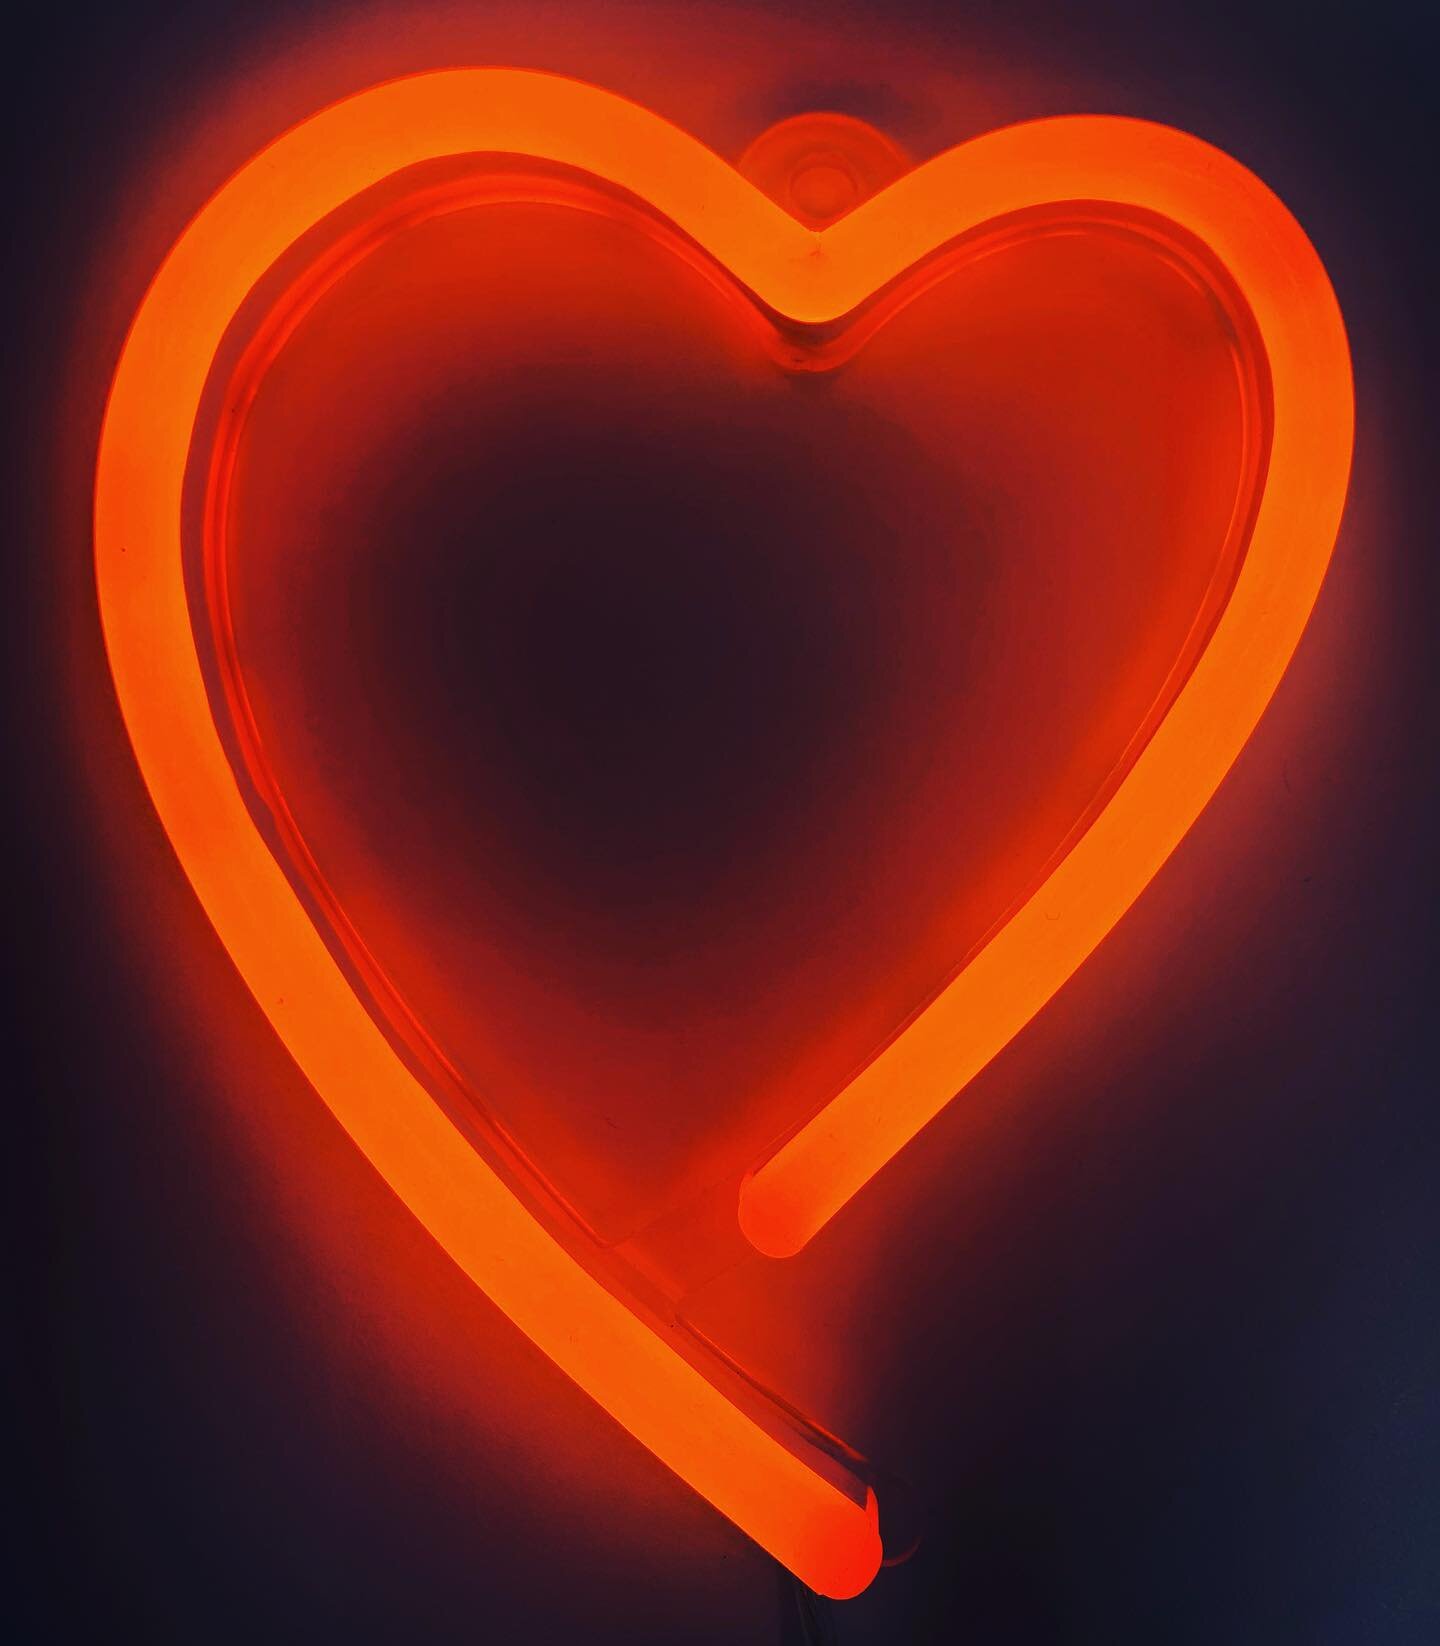 Happy hump day, love from all of us here at BN! #humpdayvibes #happyhumpday🐫 #heart #ledneon #neonlife #neonlights